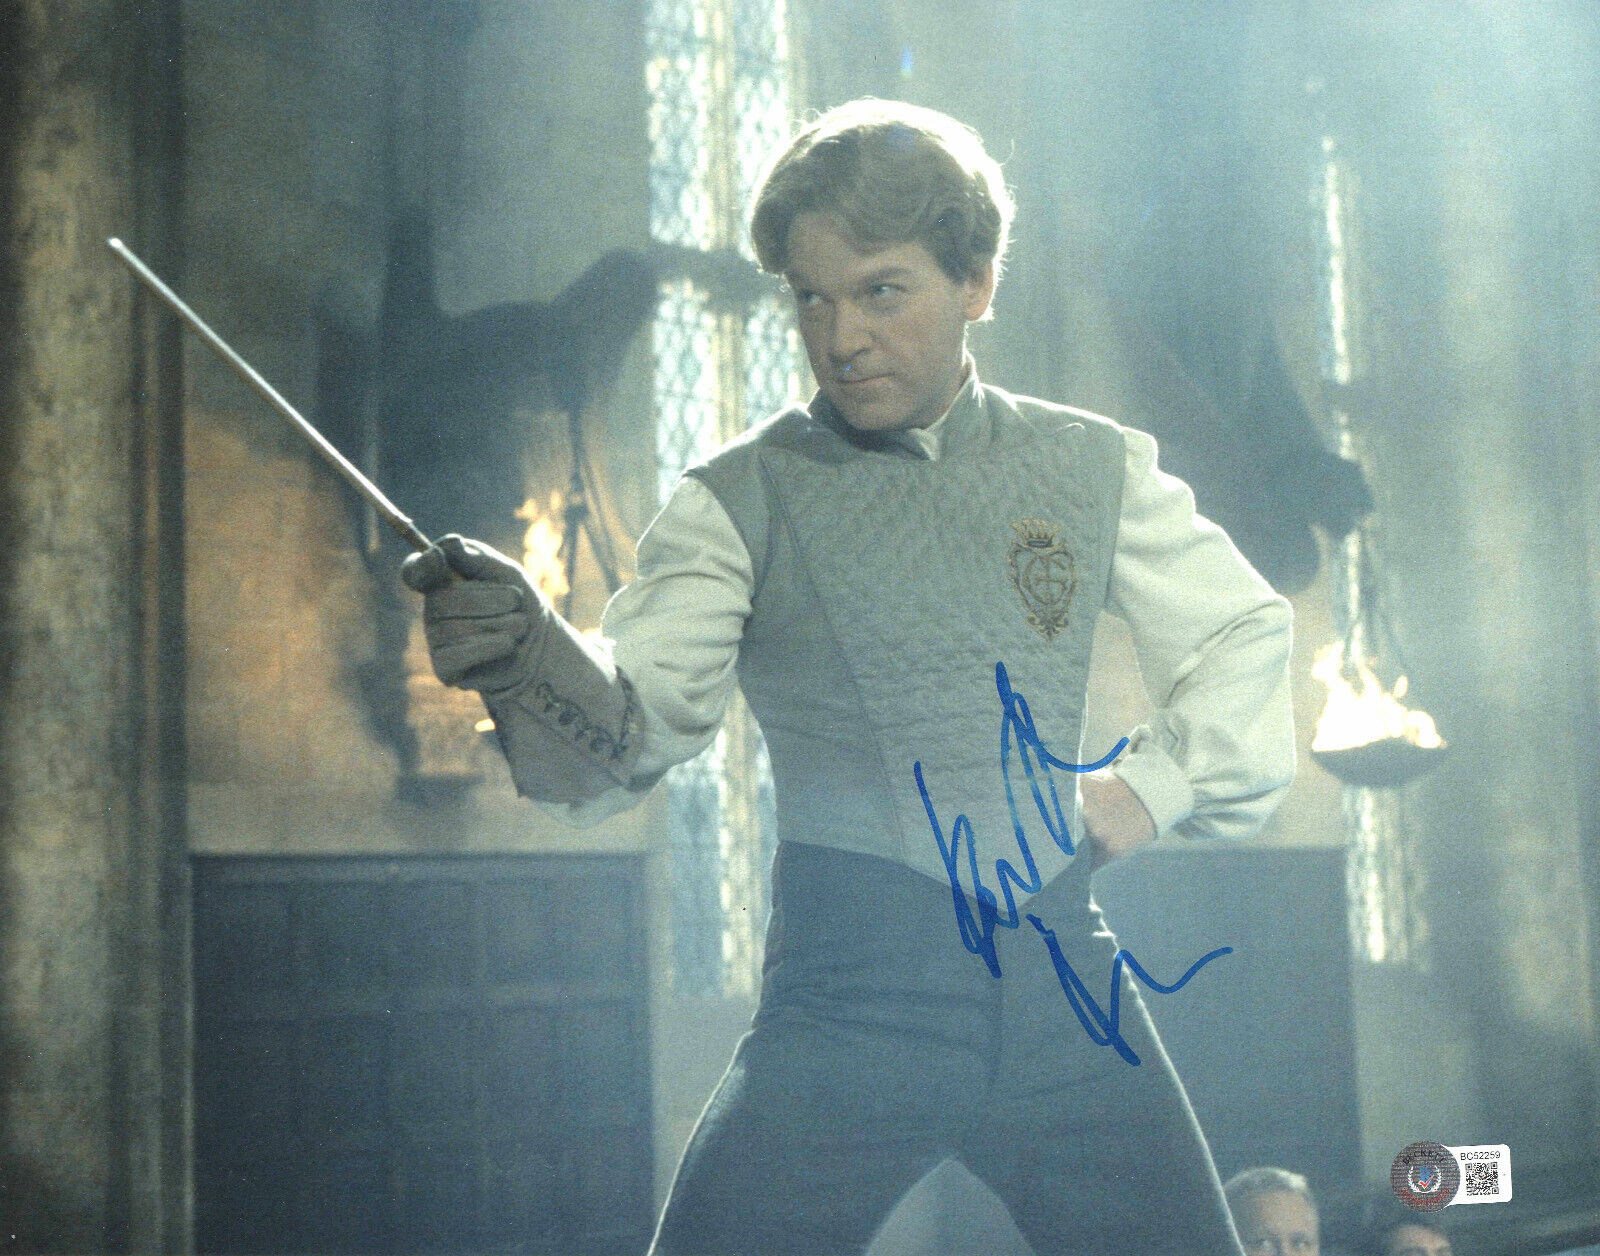 KENNETH BRANAGH SIGNED AUTOGRAPHED HARRY POTTER 11X14 PHOTO BECKETT BAS COA 10